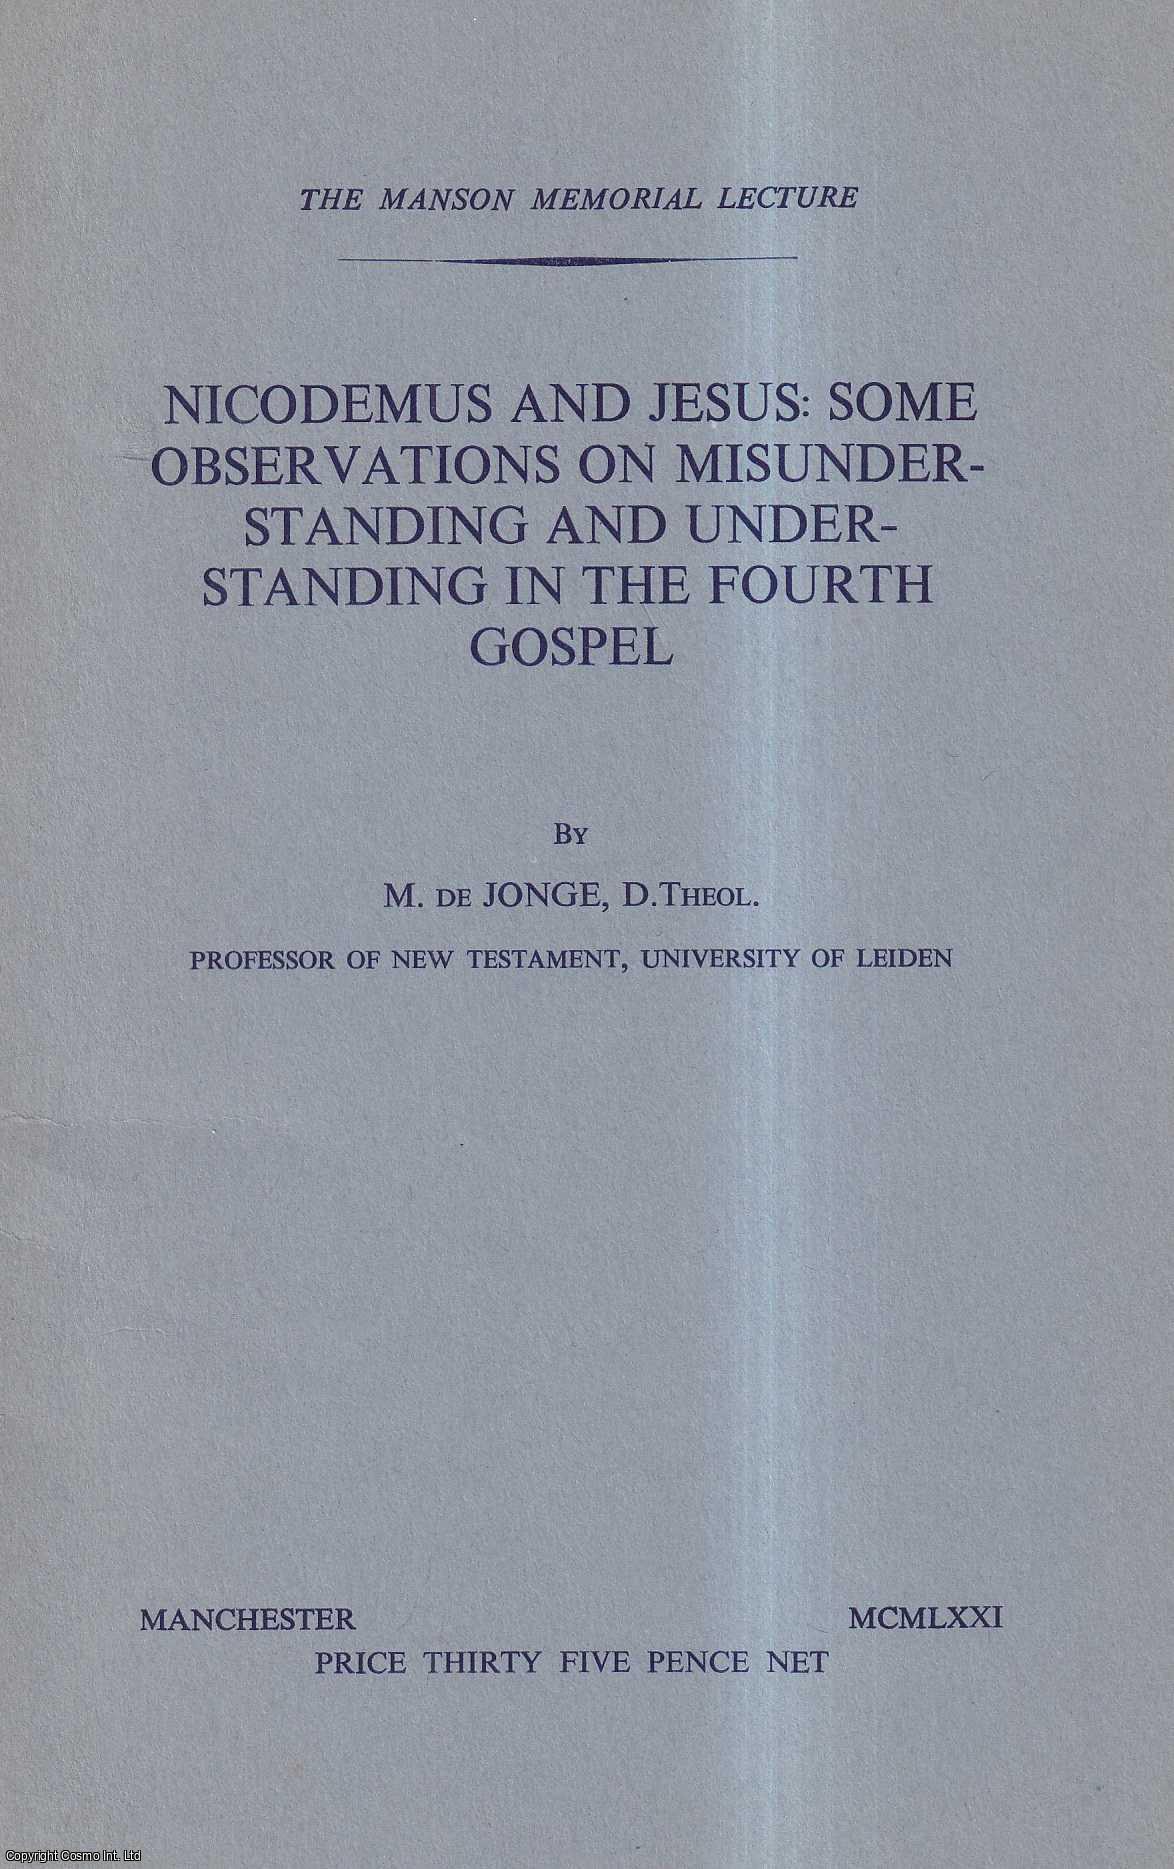 M. de Jonge - Nicodemus and Jesus: Some Observations on Misunderstanding and Understanding in the Fourth Gospel. Reprinted from the Bulletin of the John Rylands Library.